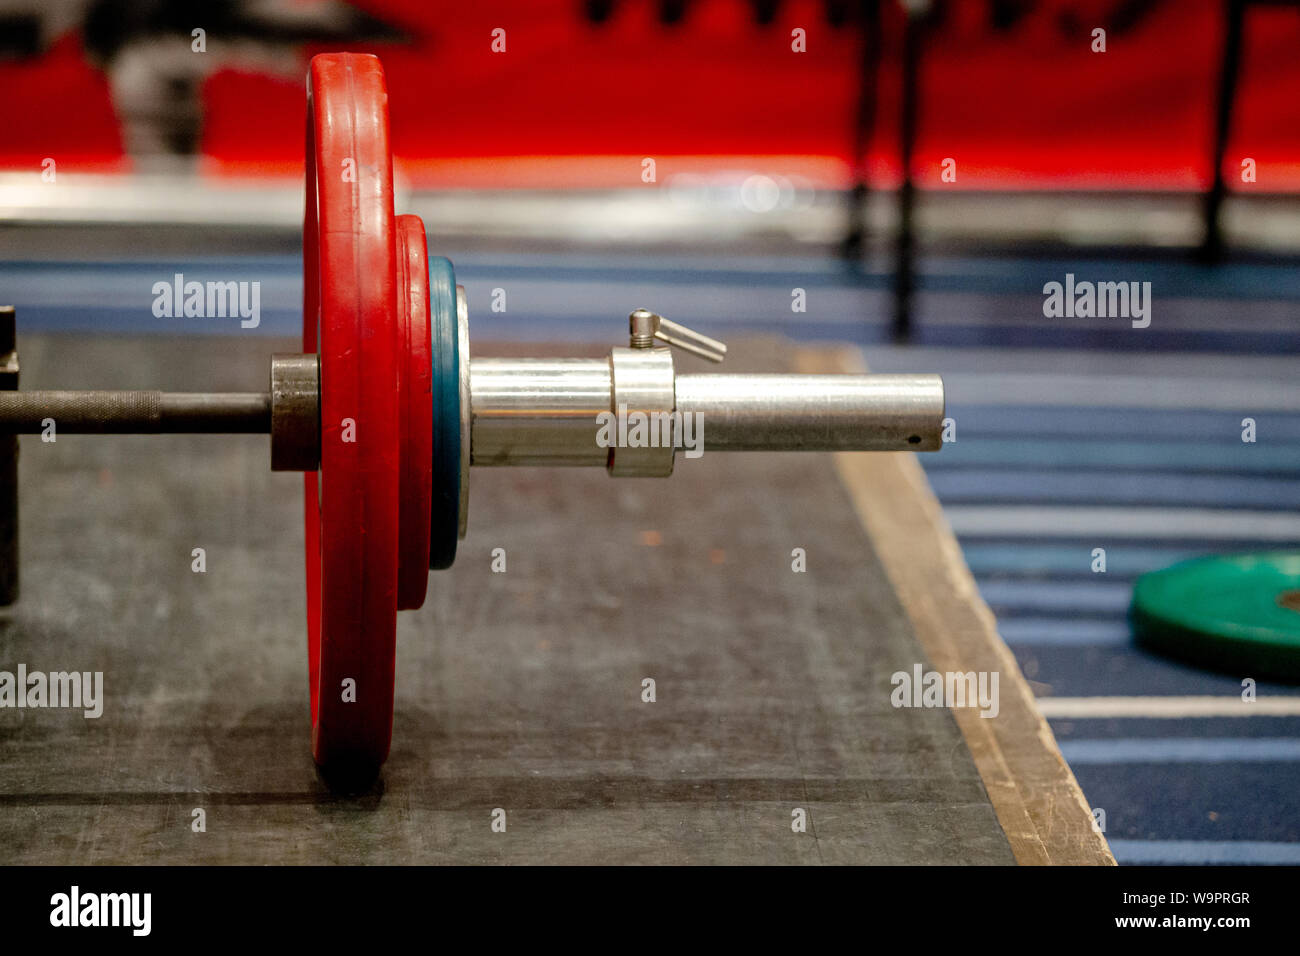 bar with plates on ground for deadlift competition Stock Photo